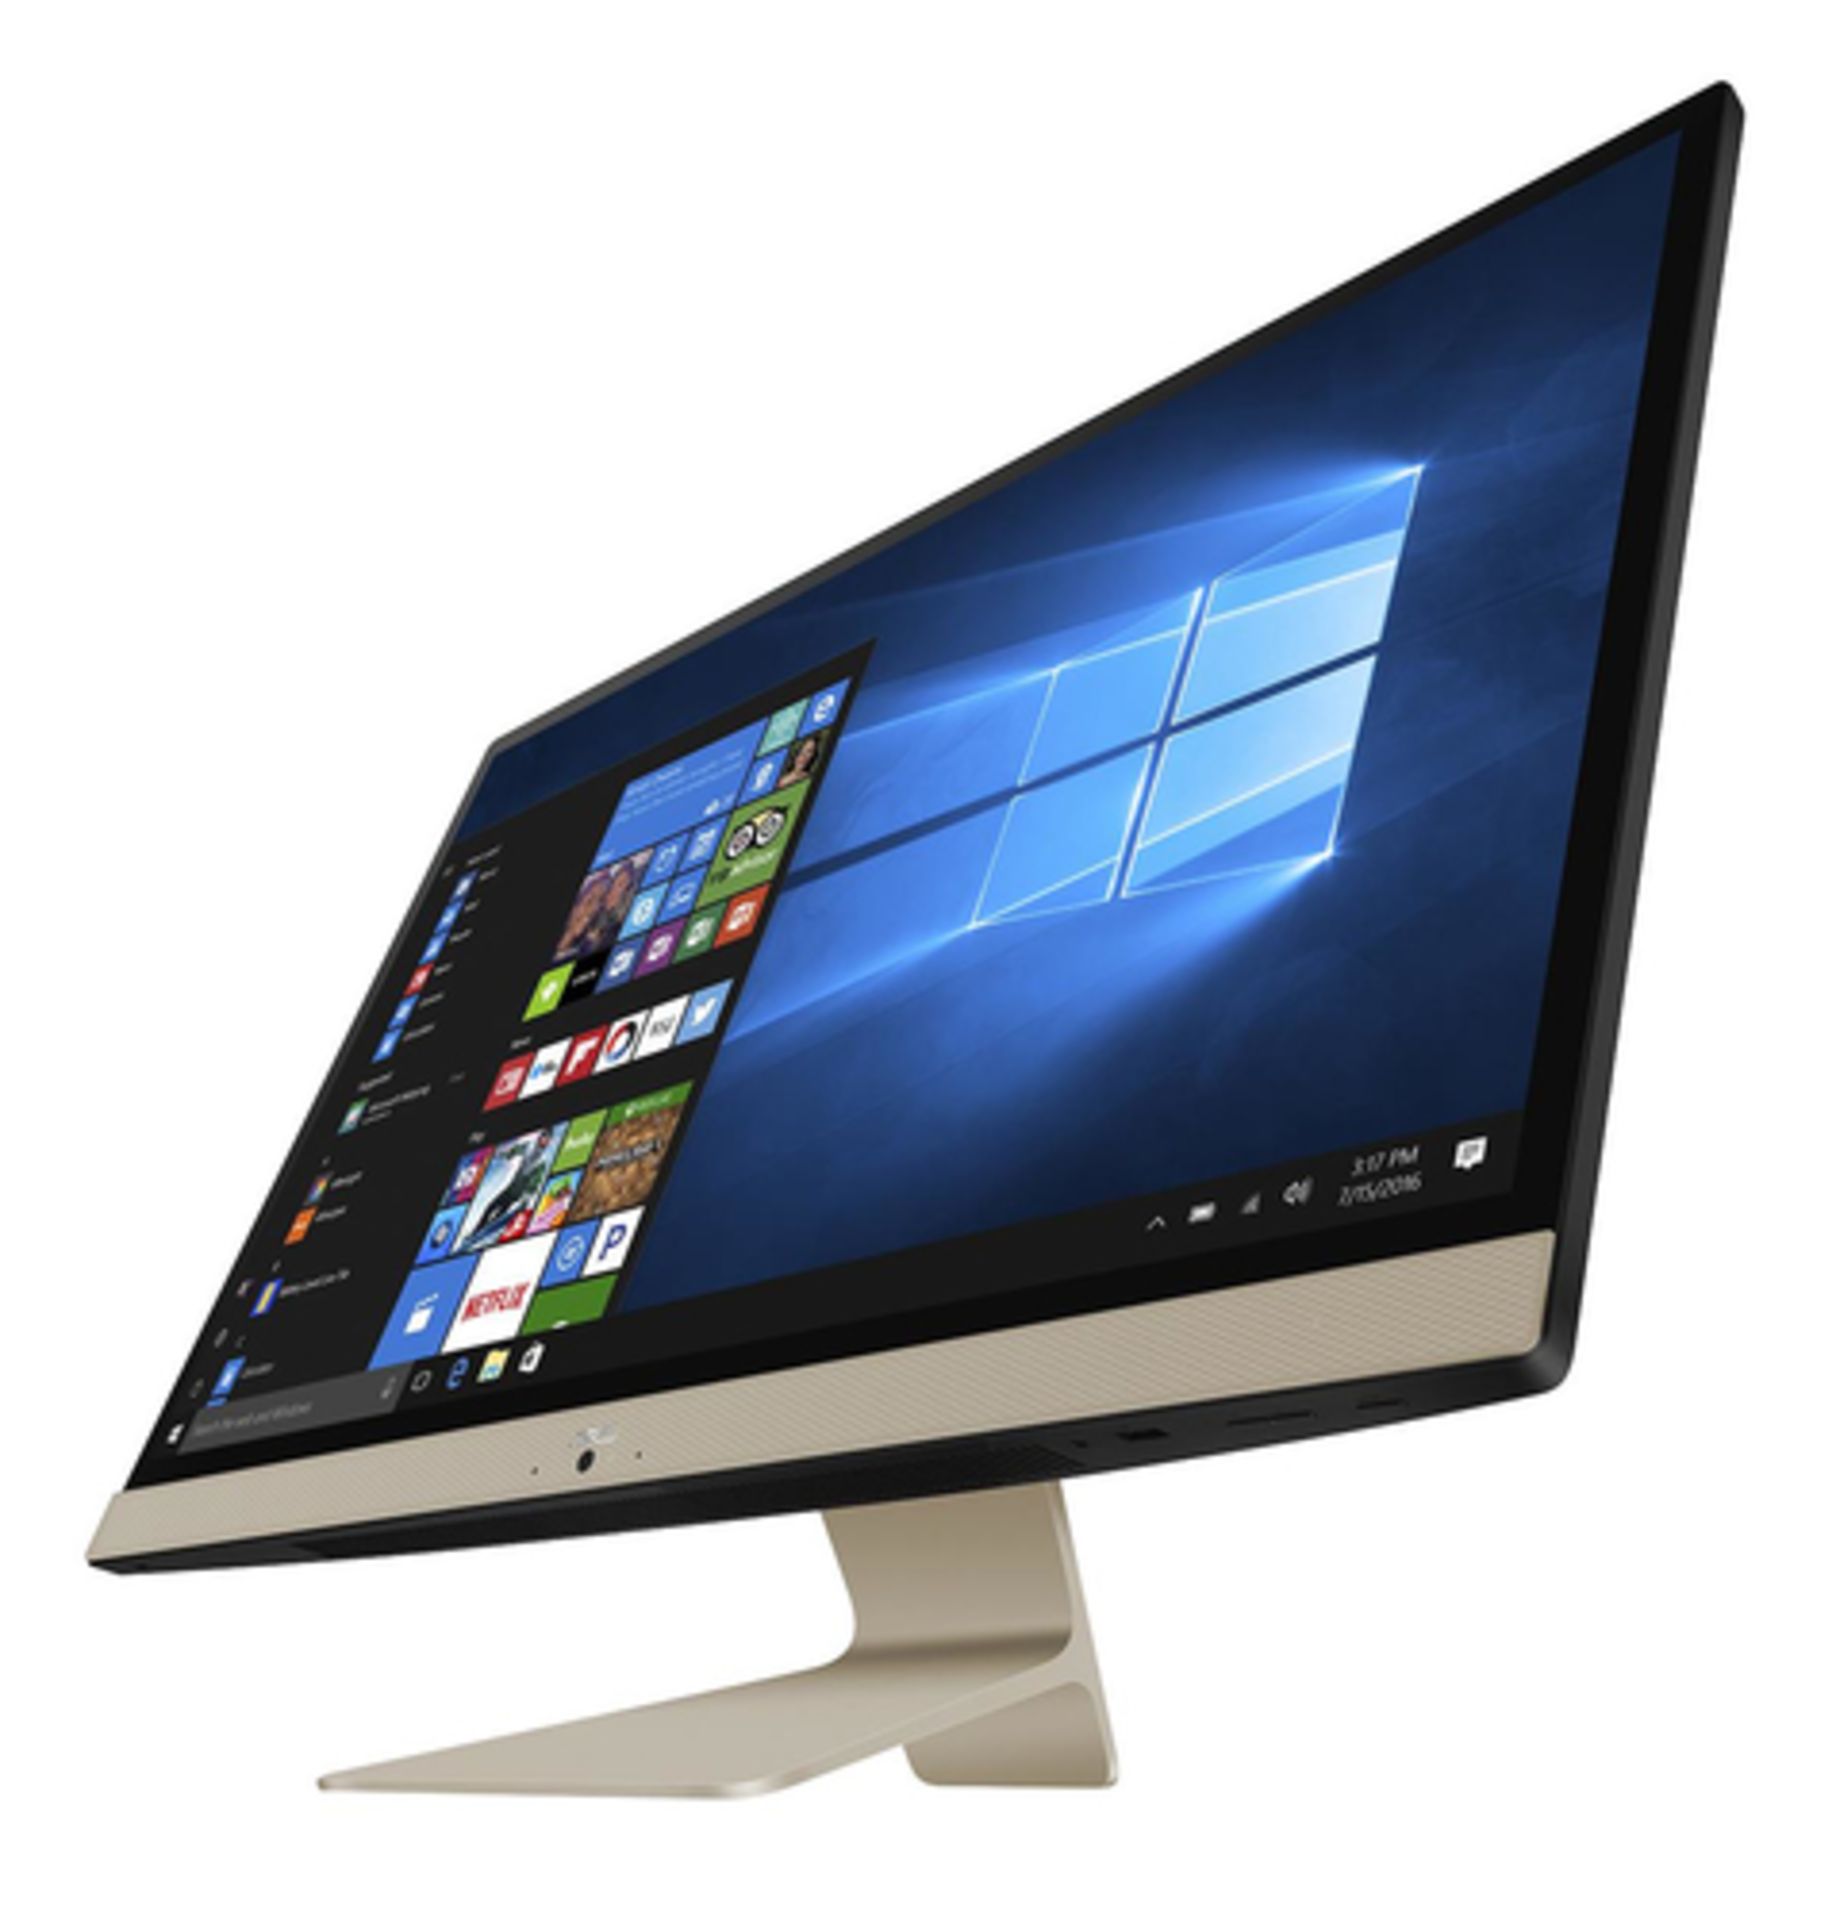 NEW & BOXED ASUS Vivo AiO V272UNK-BA139T All-in-One PC. RRP £999.99. (PCKBW). Intel Core i7-8550U, - Image 2 of 2